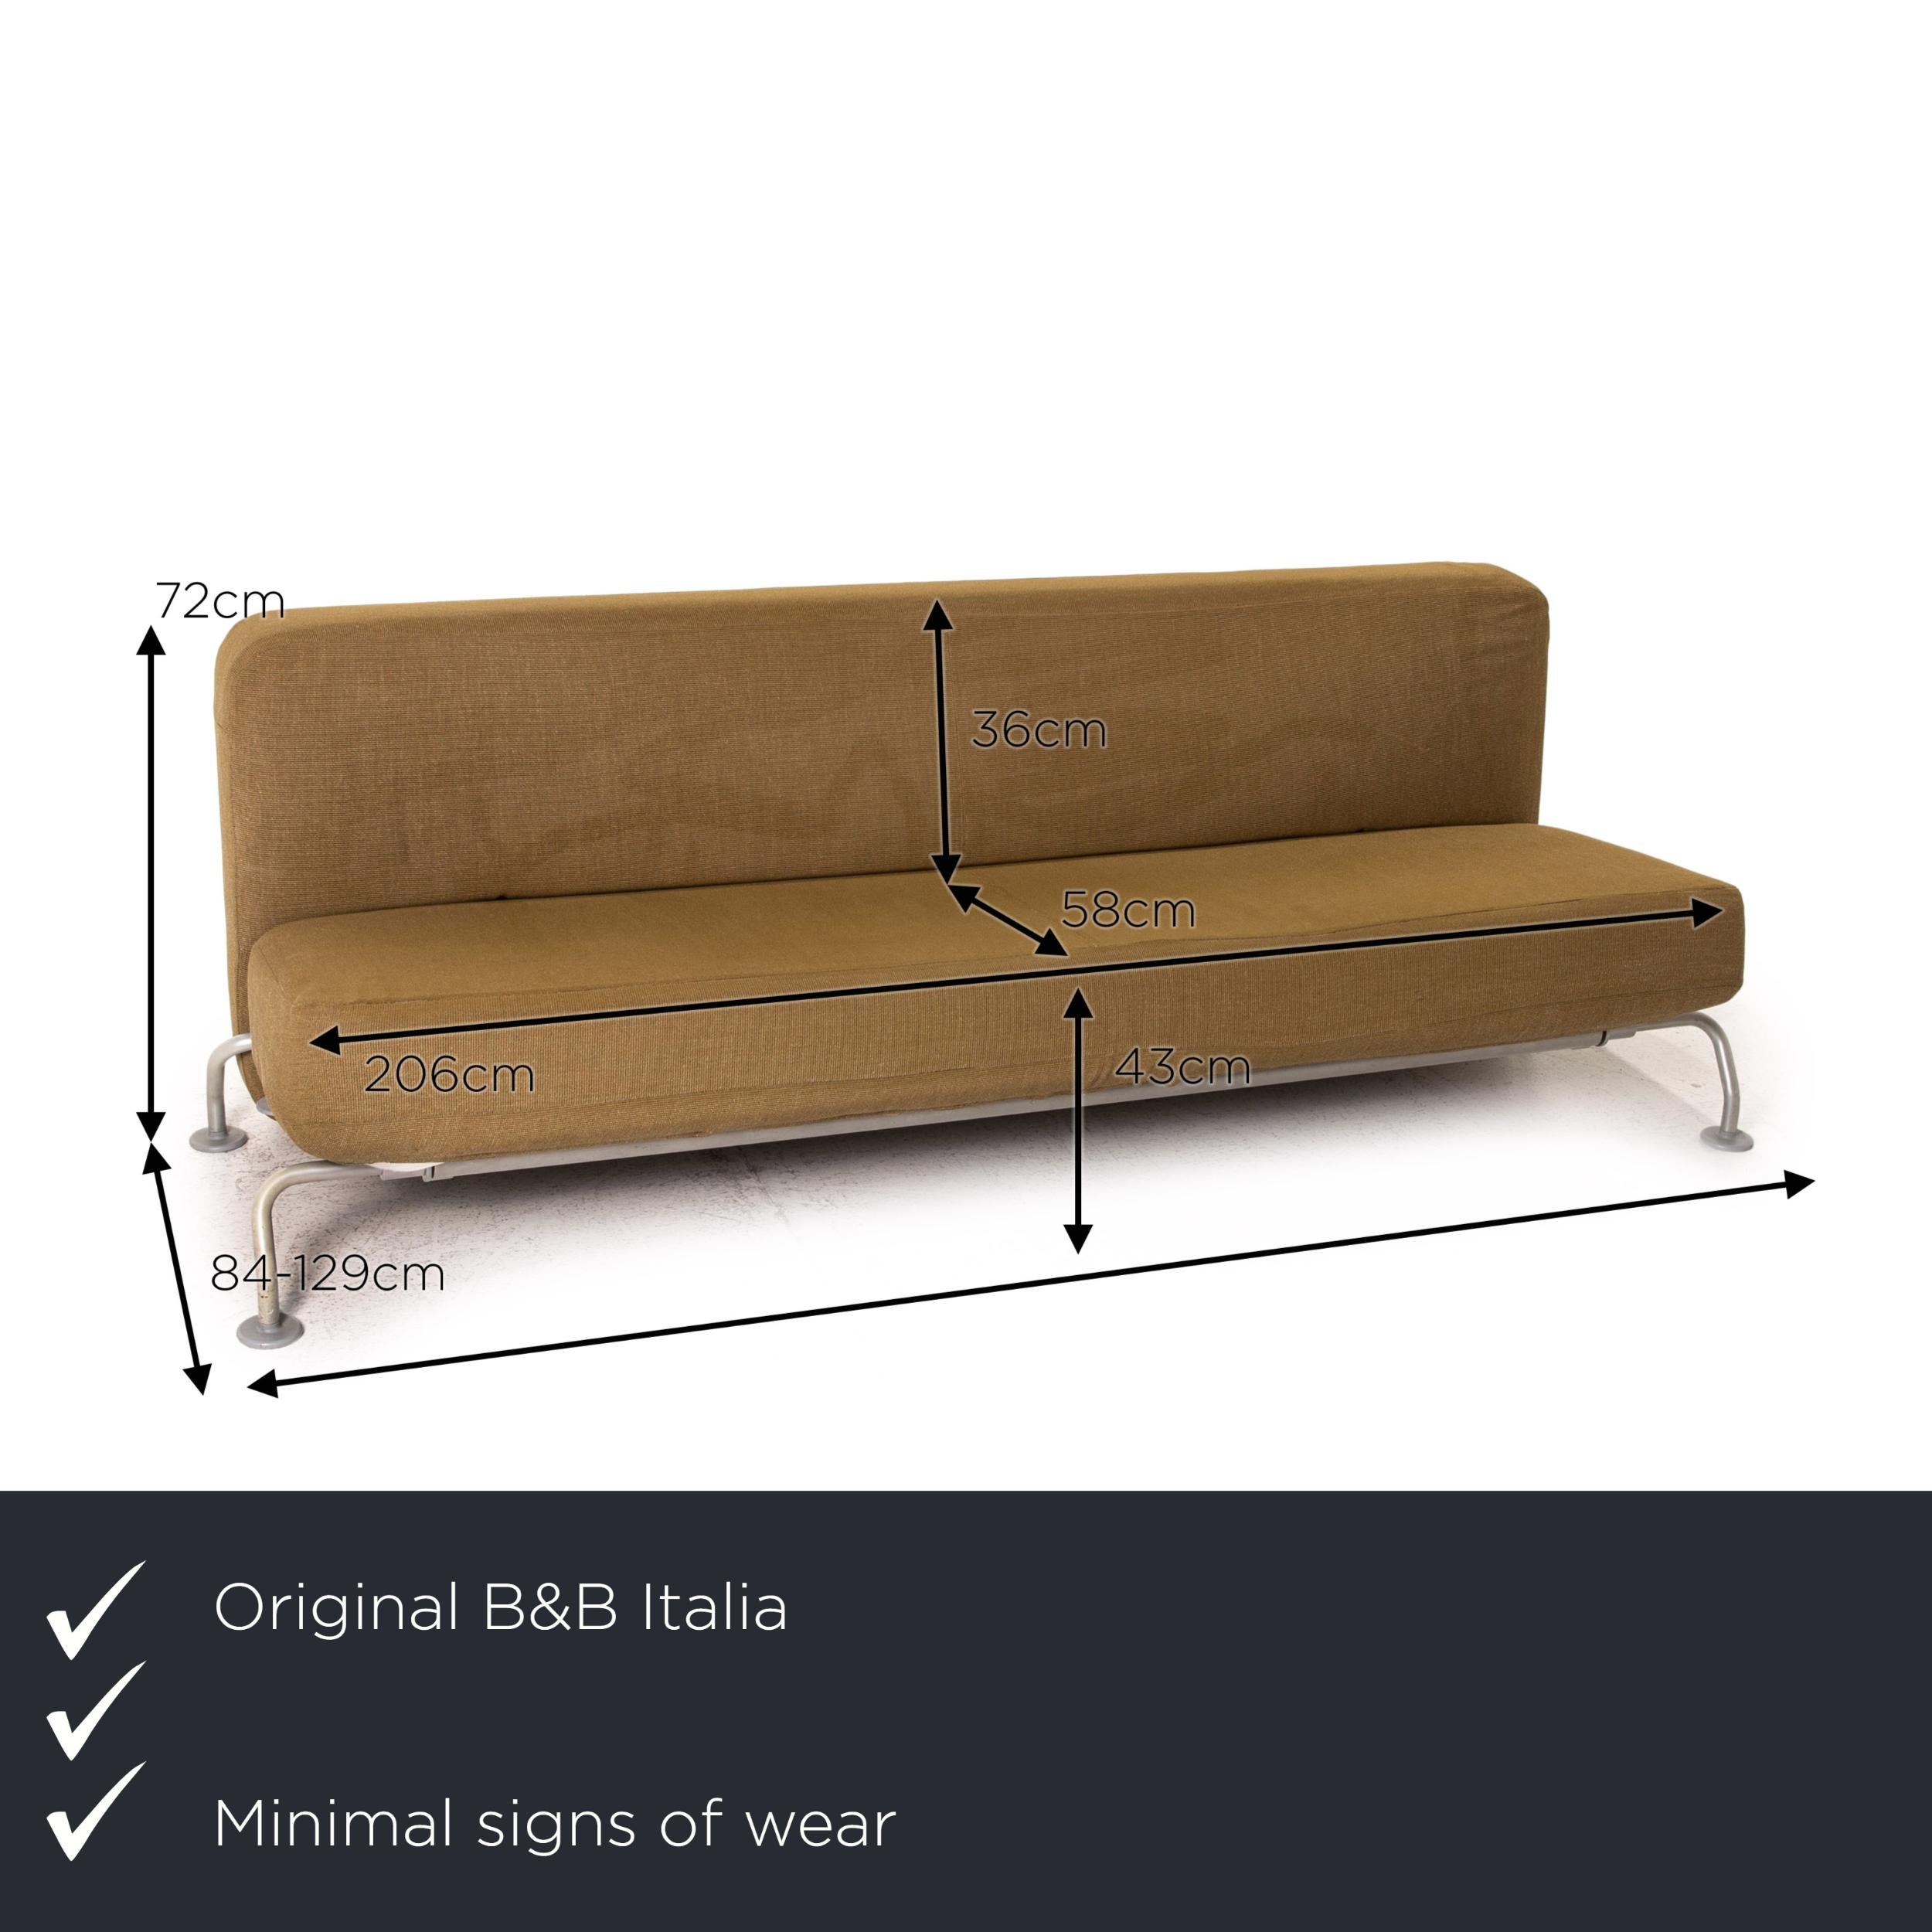 We present to you a B&B Italia Lunar fabric sofa bed olive green three-seater function sleeping.
 

 Product measurements in centimeters:
 

Depth: 84
Width: 221
Height: 72
Seat height: 43
Seat depth: 58
Seat width: 206
Back height: